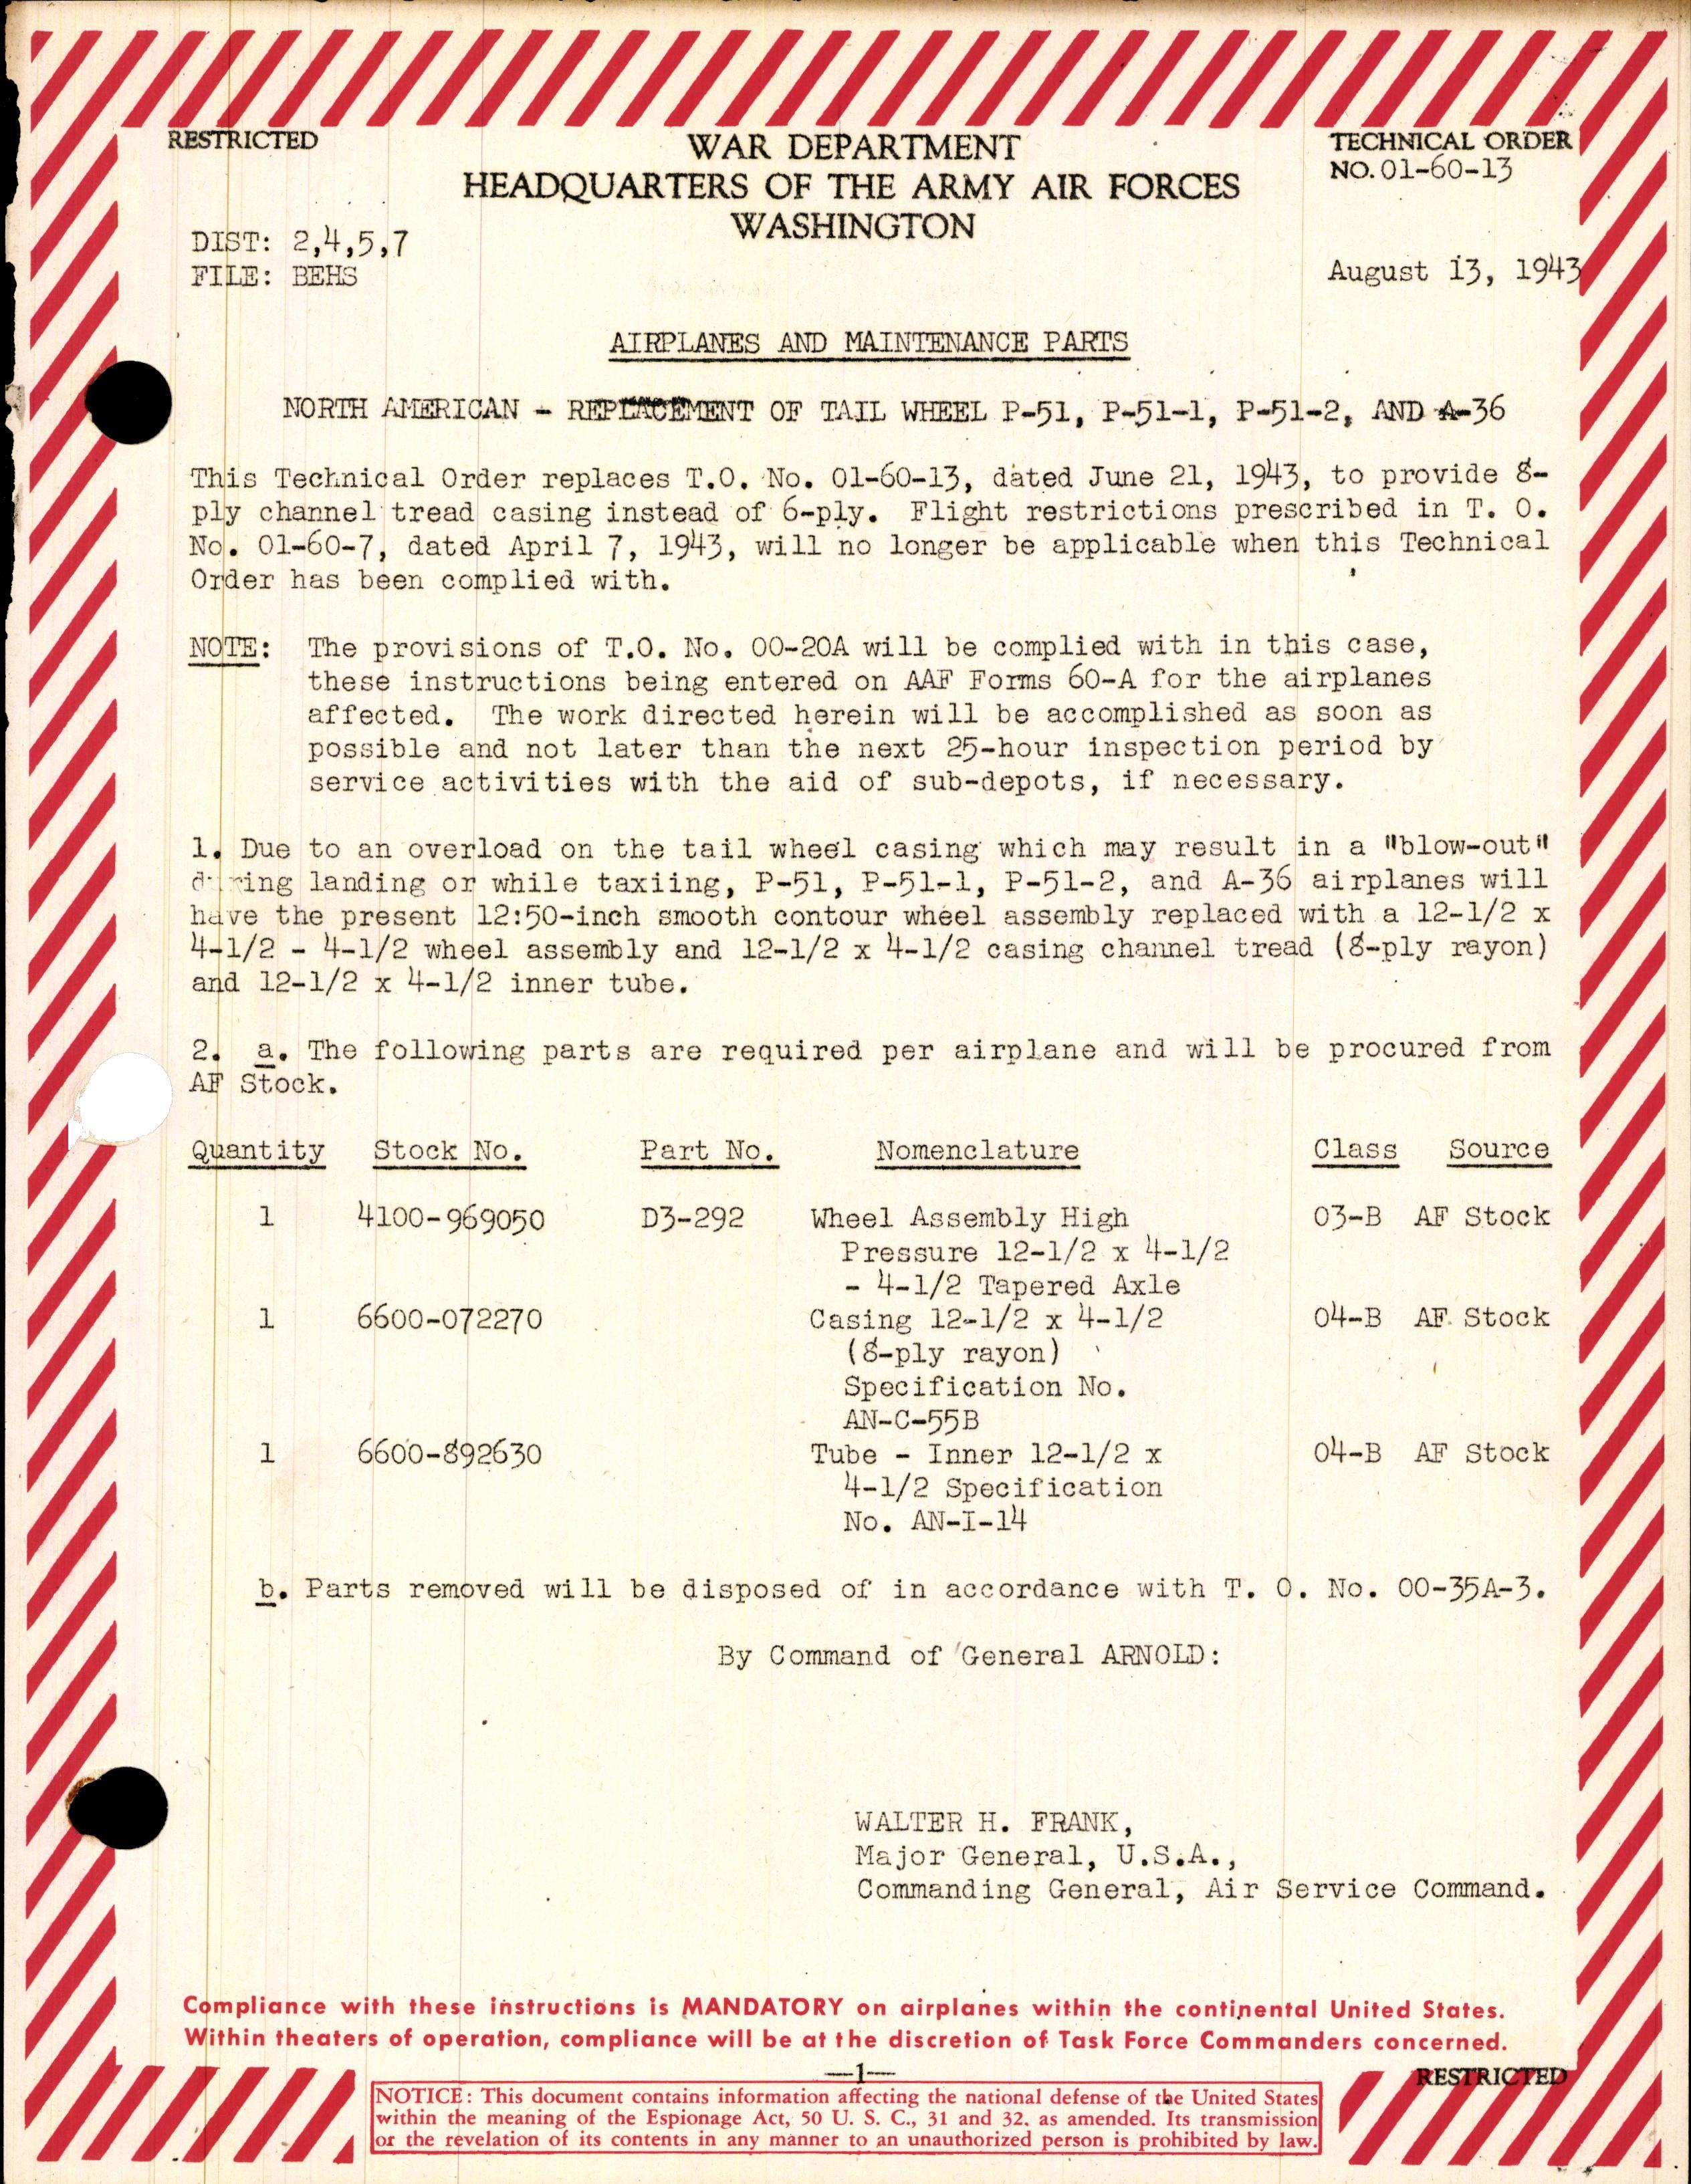 Sample page 1 from AirCorps Library document: Replacement of Tail Wheel for P-51, P-51-1, P-51-2, and A-36